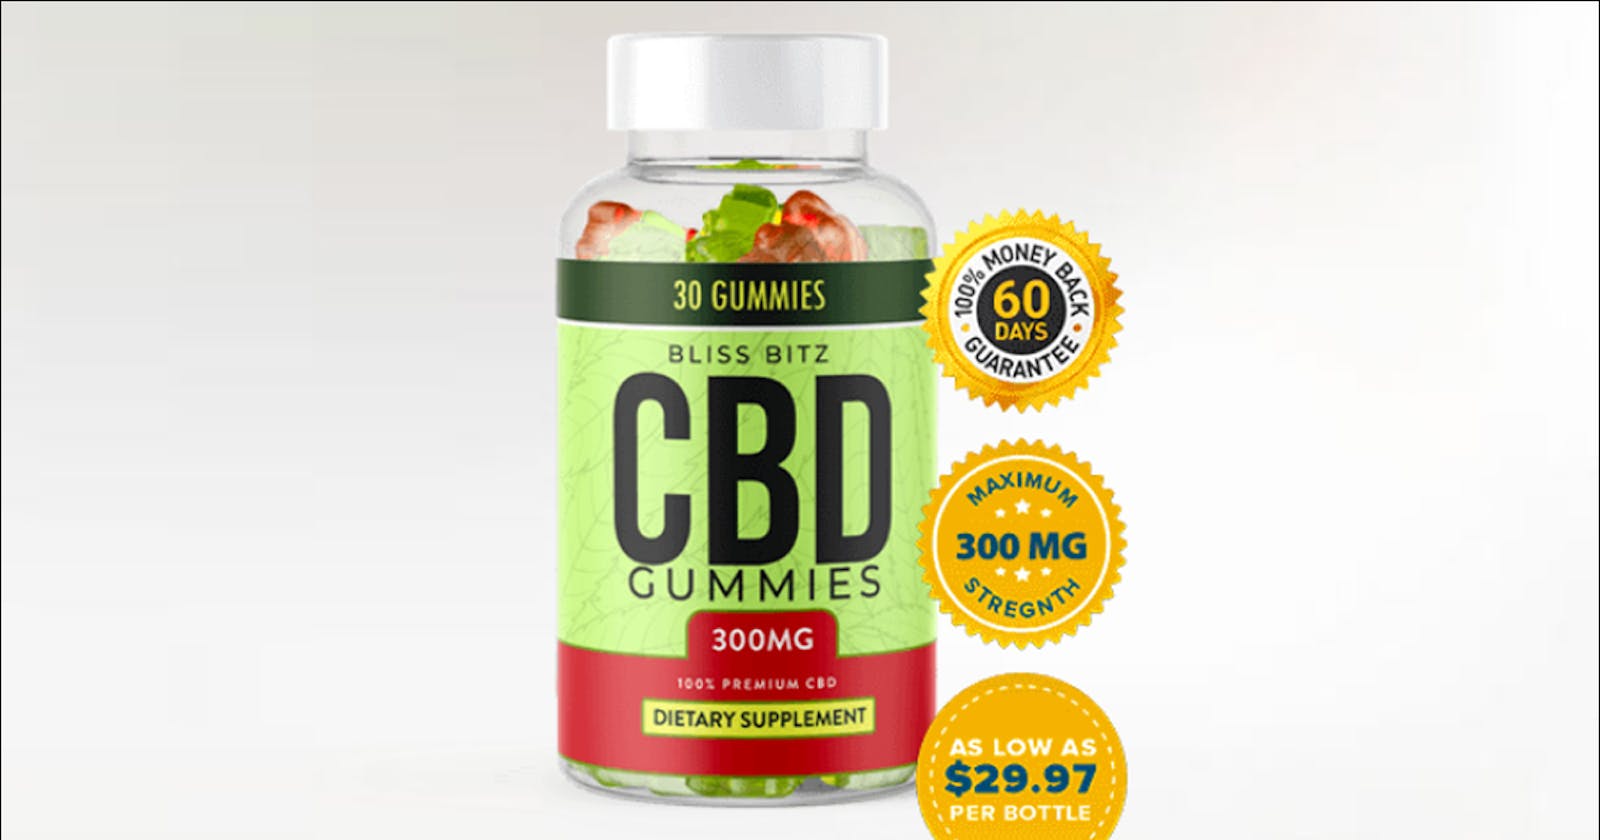 DR OZ BioHeal CBD Gummies CHEAP PRICE EXPOSED Definitely Buy After Reading!